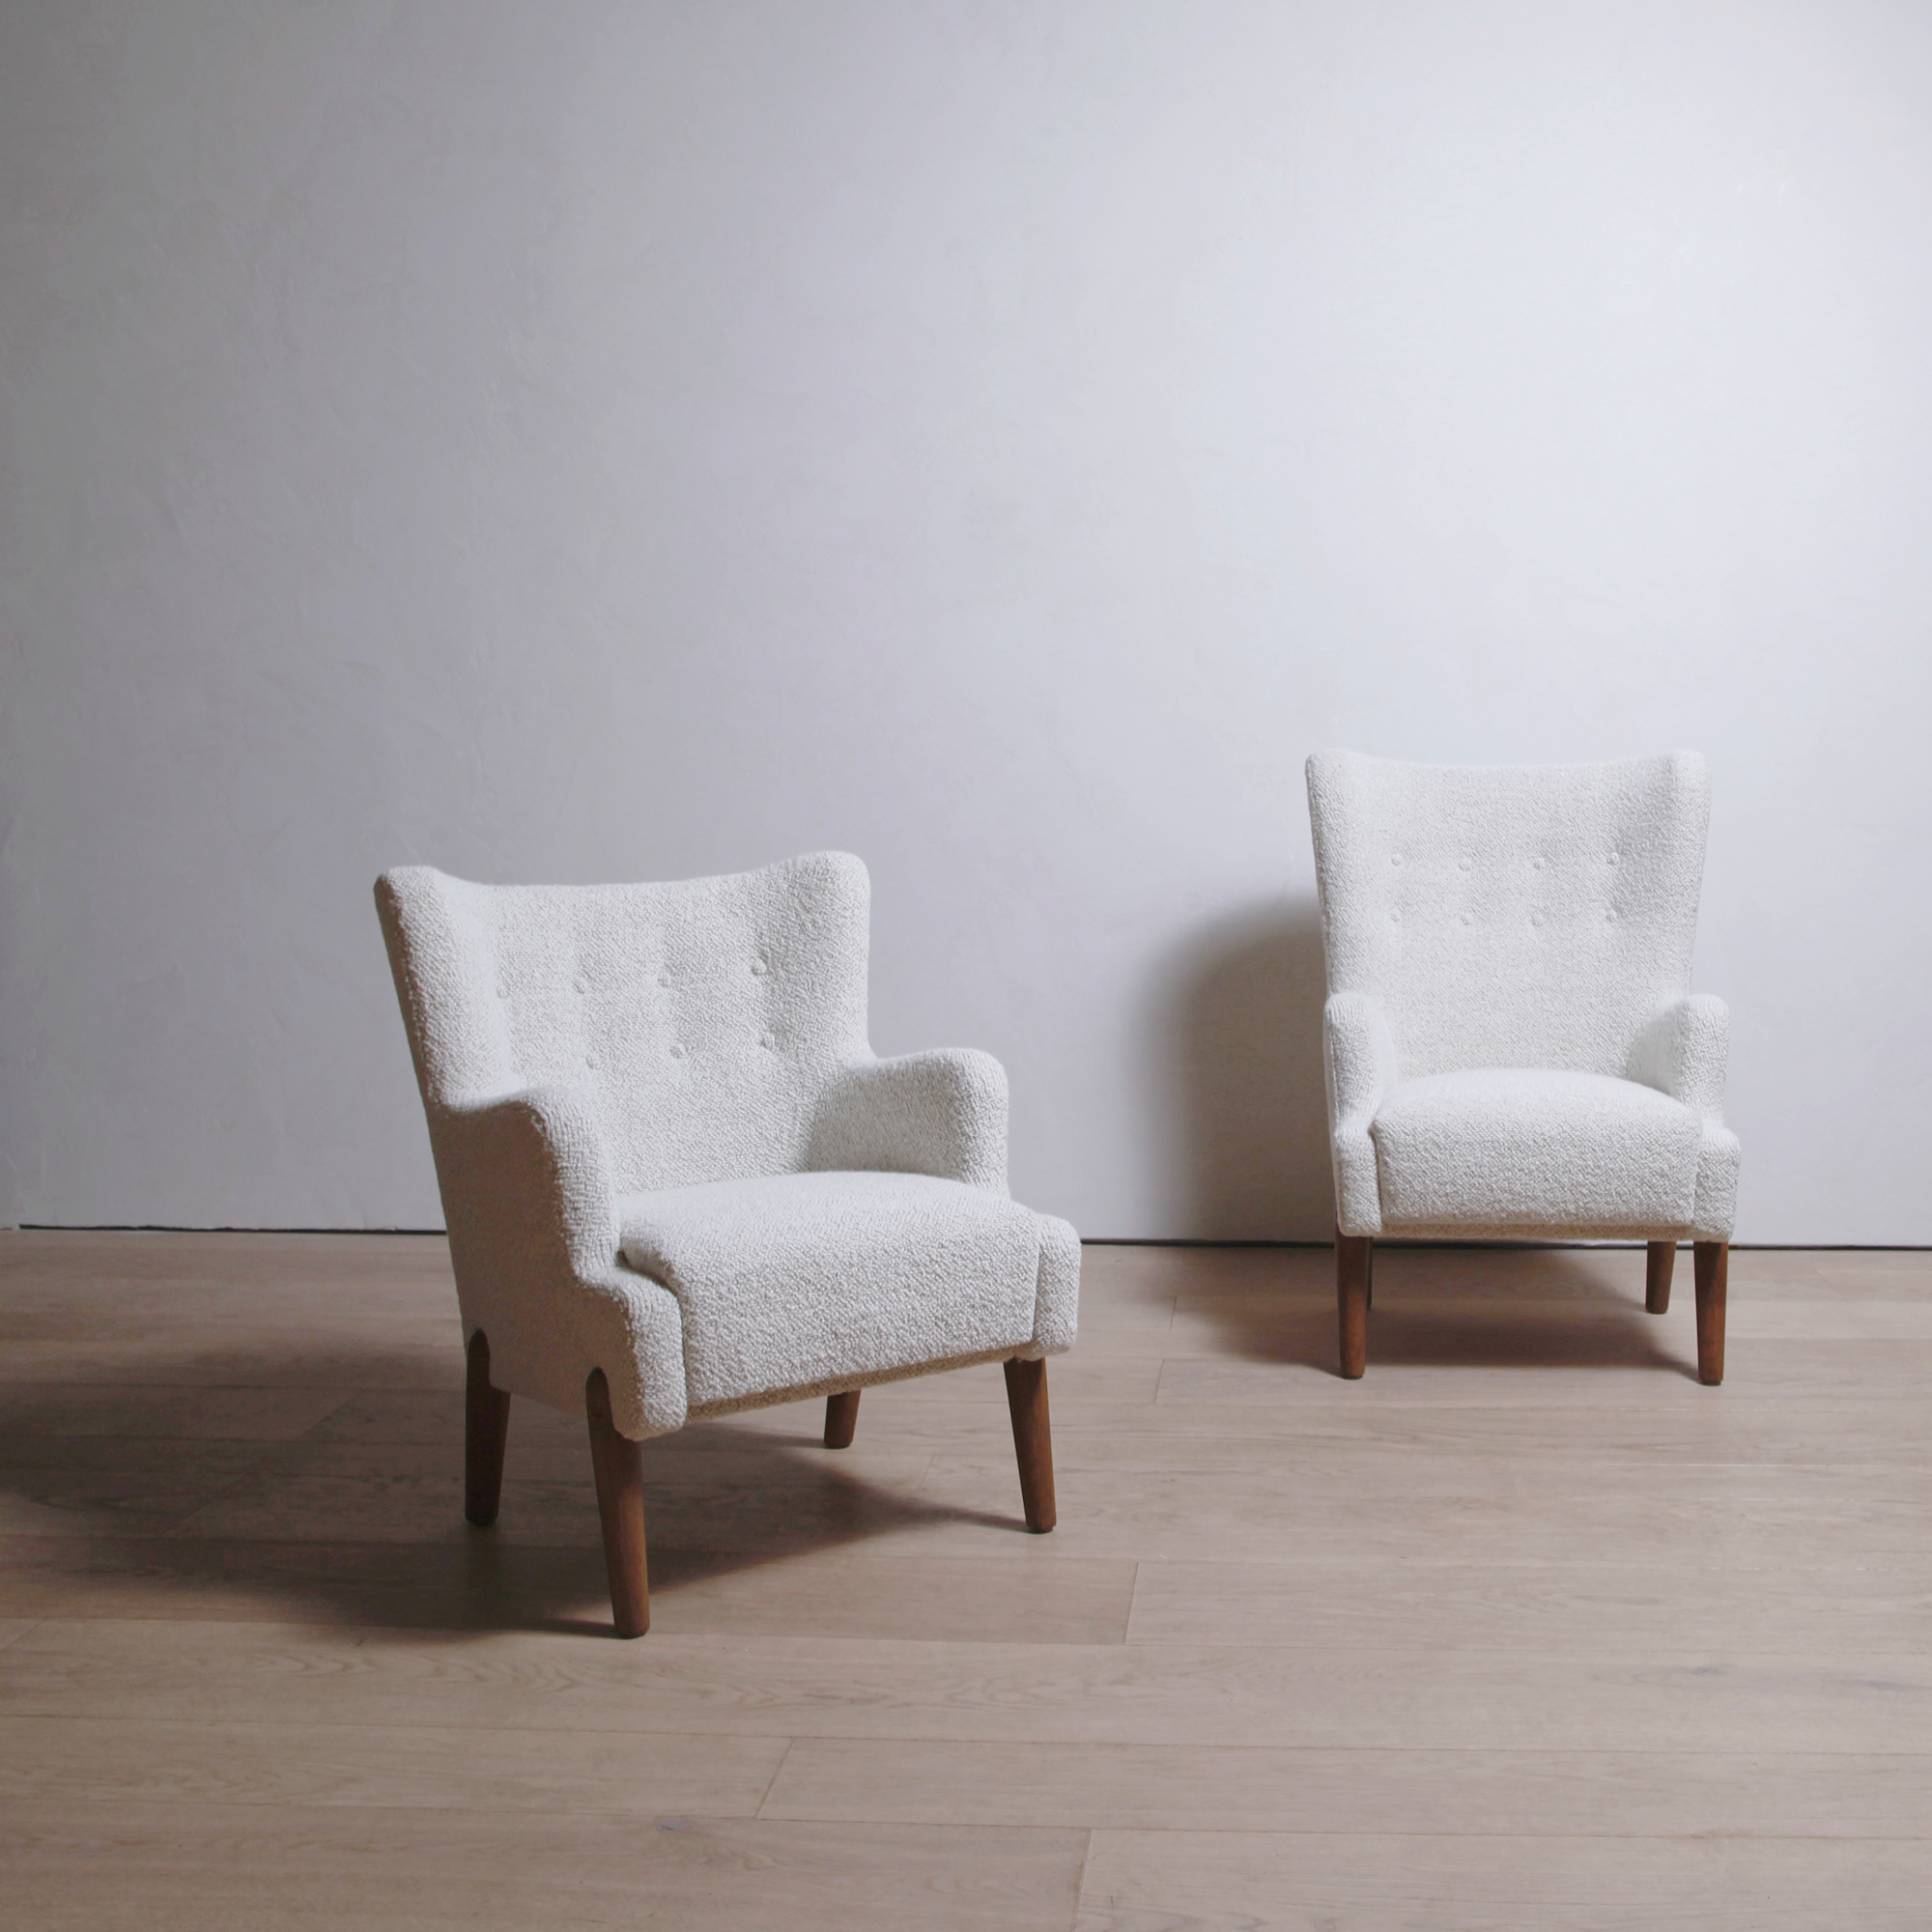 Pair of Arm Chairs by Eva and Nils Koppel